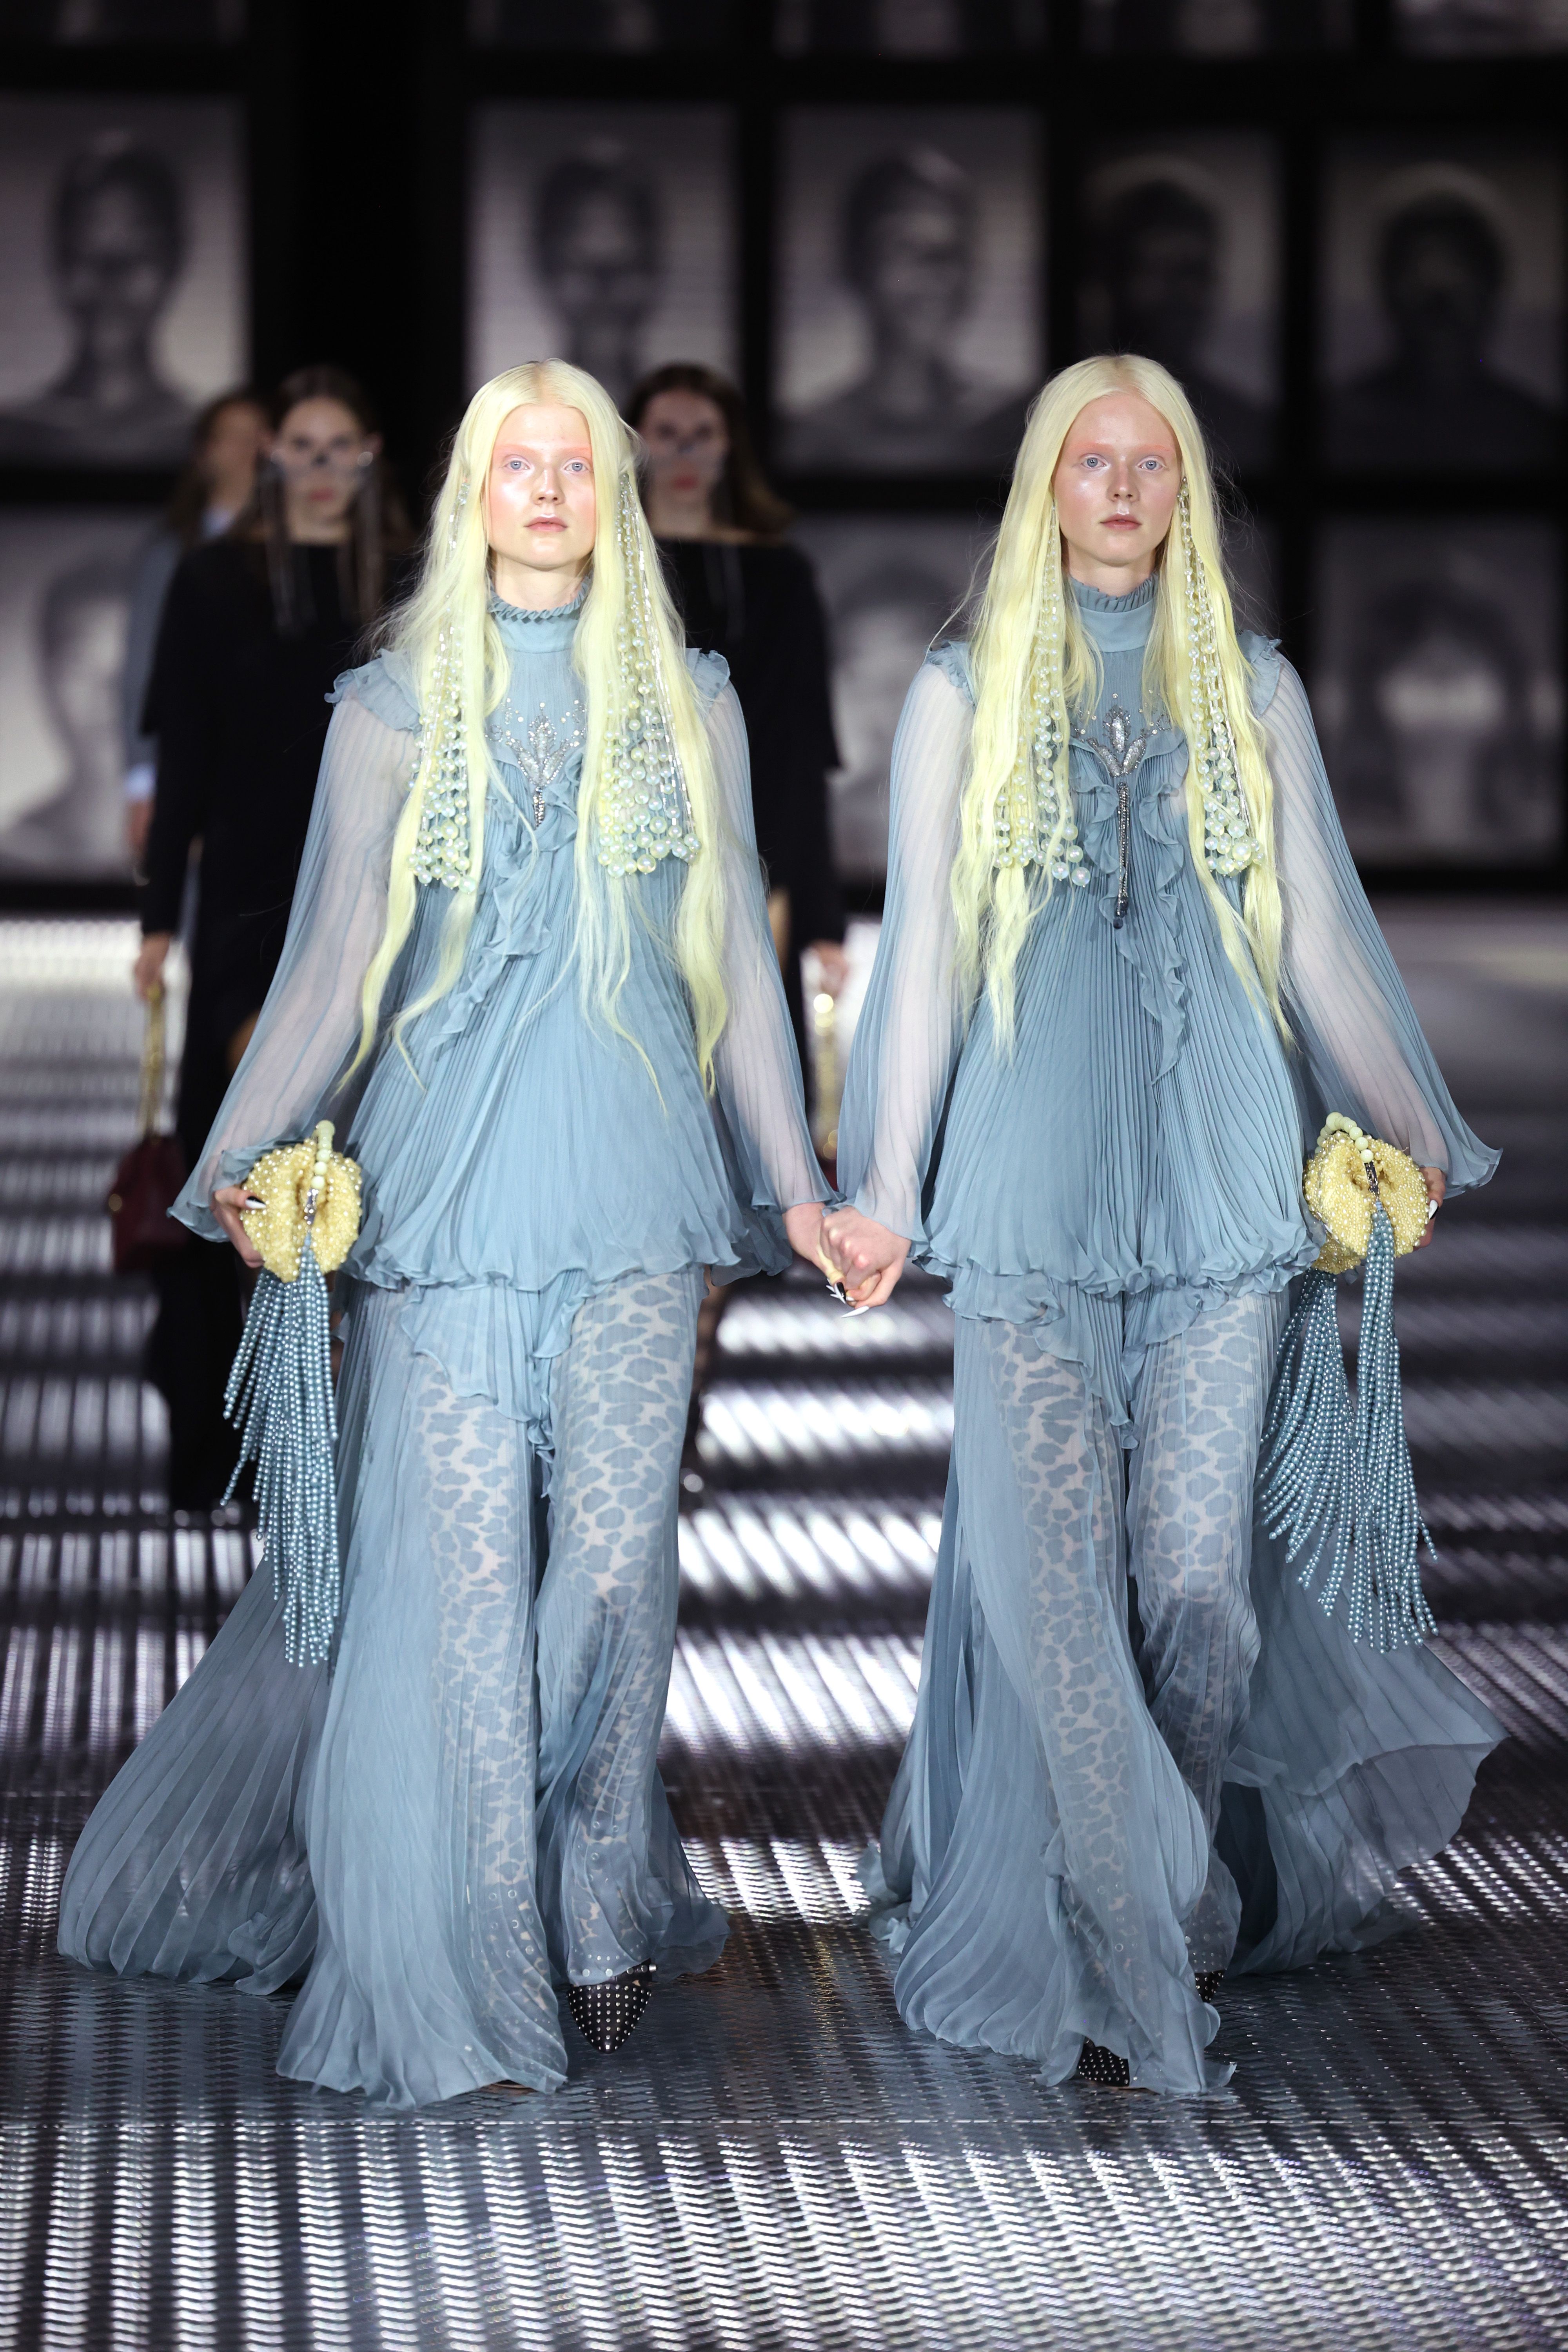 Gucci Cast 68 Sets of Identical Twins for Its Milan Show